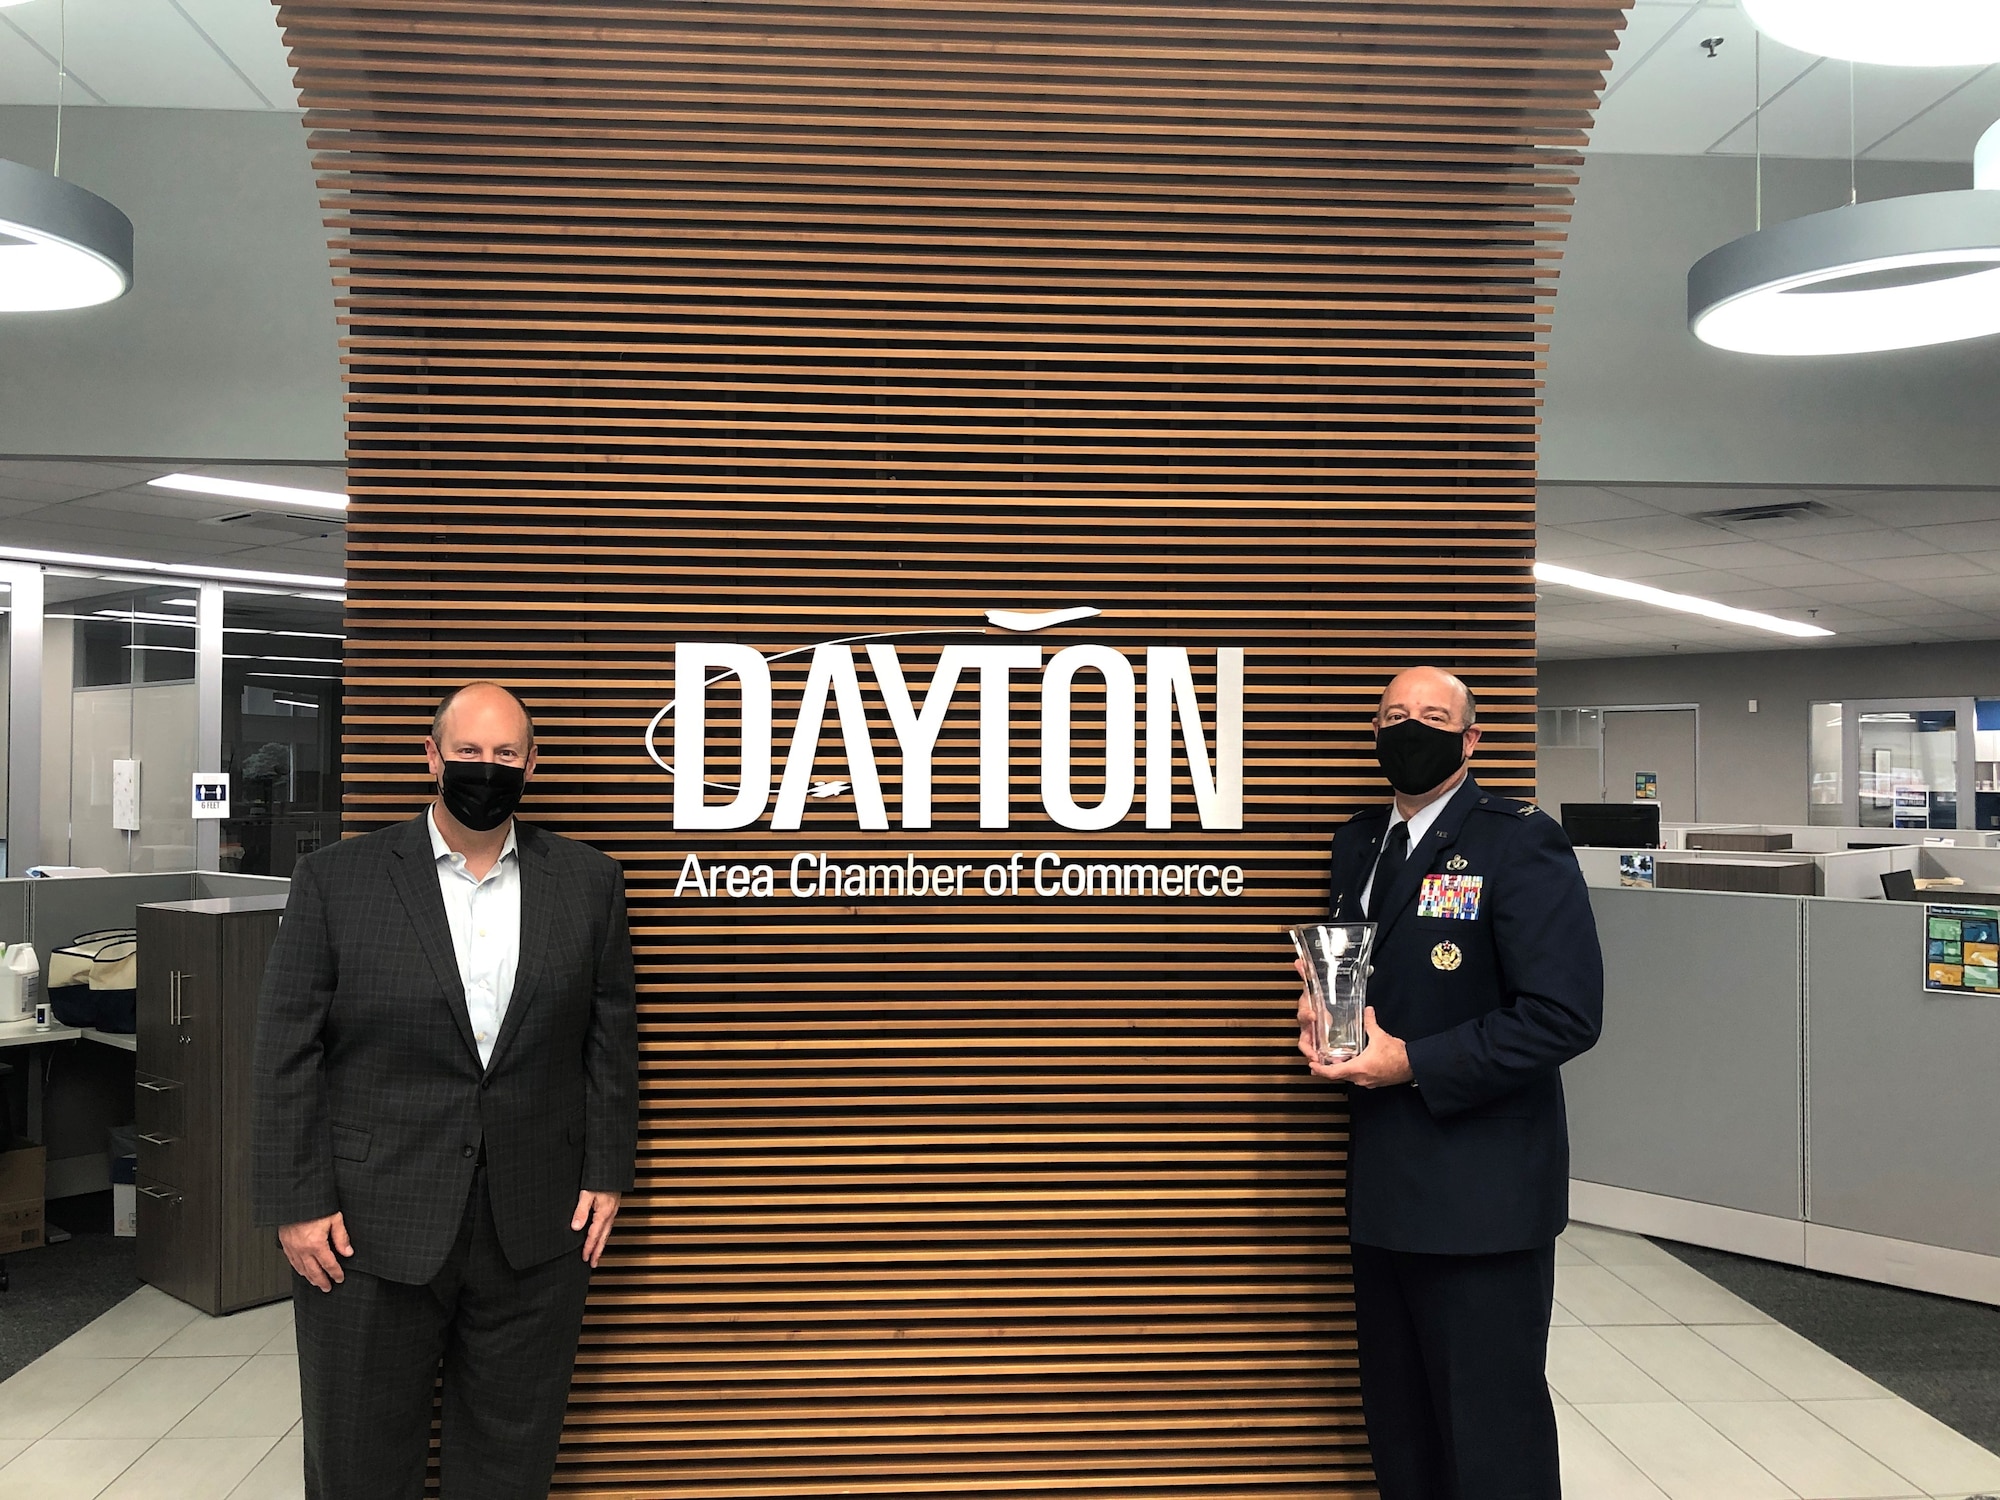 Col. Patrick Miller, 88th Air Base Wing commander, accepts the Program Partner of the Year Award on the installation’s behalf. The award recognizes WPAFB’s commitment to Leadership Dayton and the Dayton Area Chamber of Commerce.